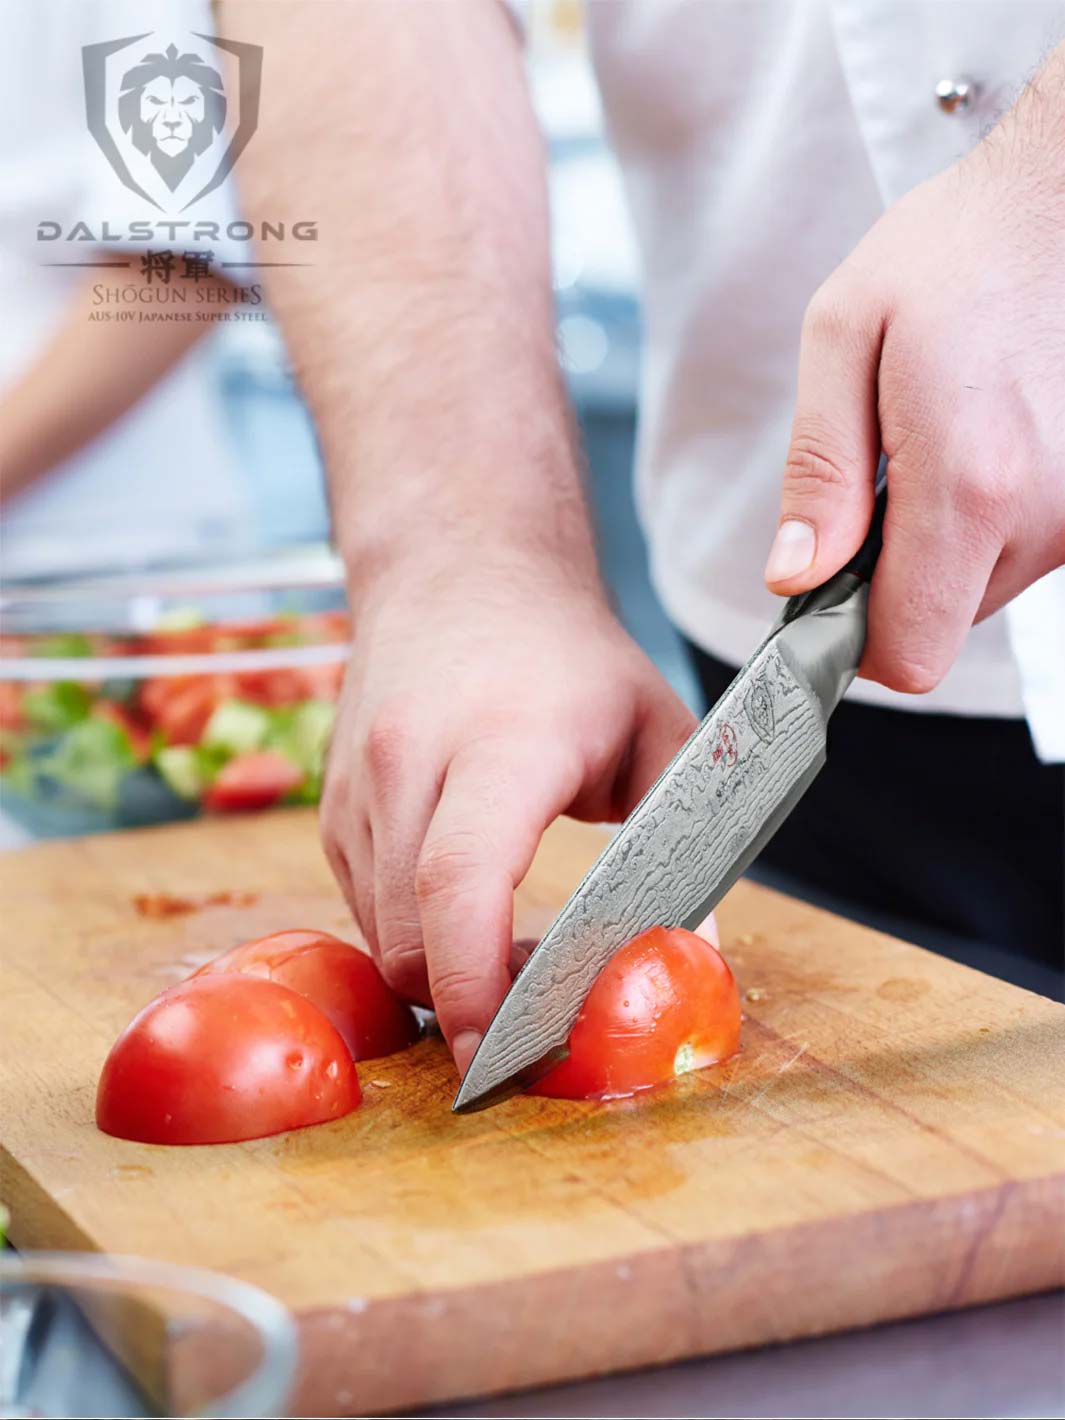 Dalstrong shogun series 6 inch utility knife with black handle slicing through a tomato on a wooden board.